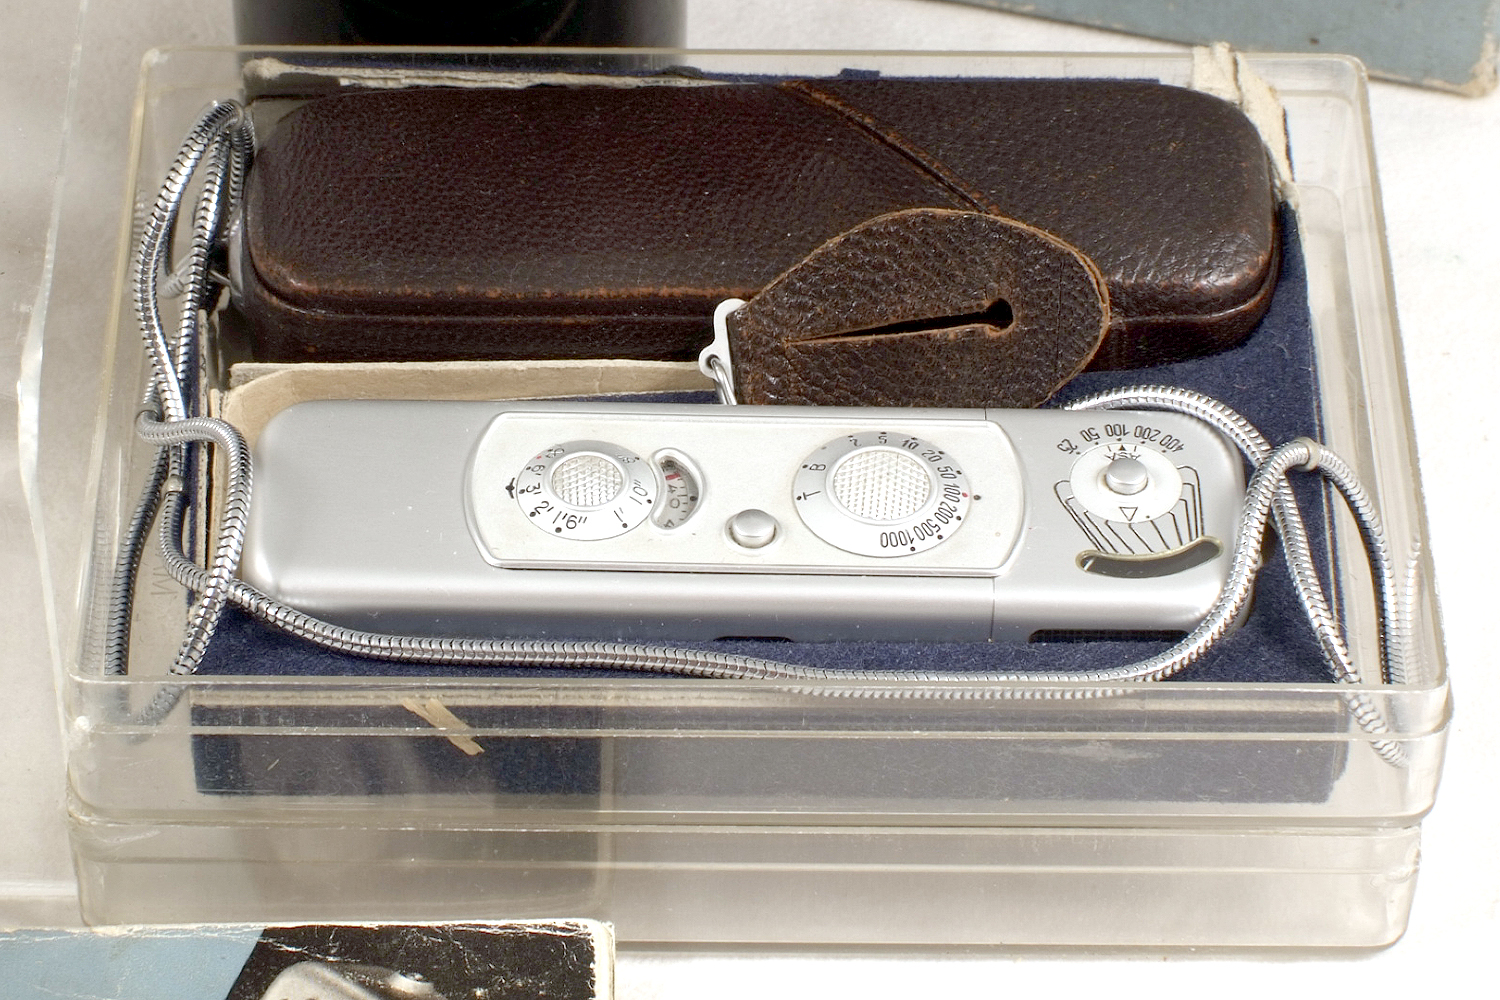 Extensive Minox B Subminiature Outfit. - Image 2 of 3